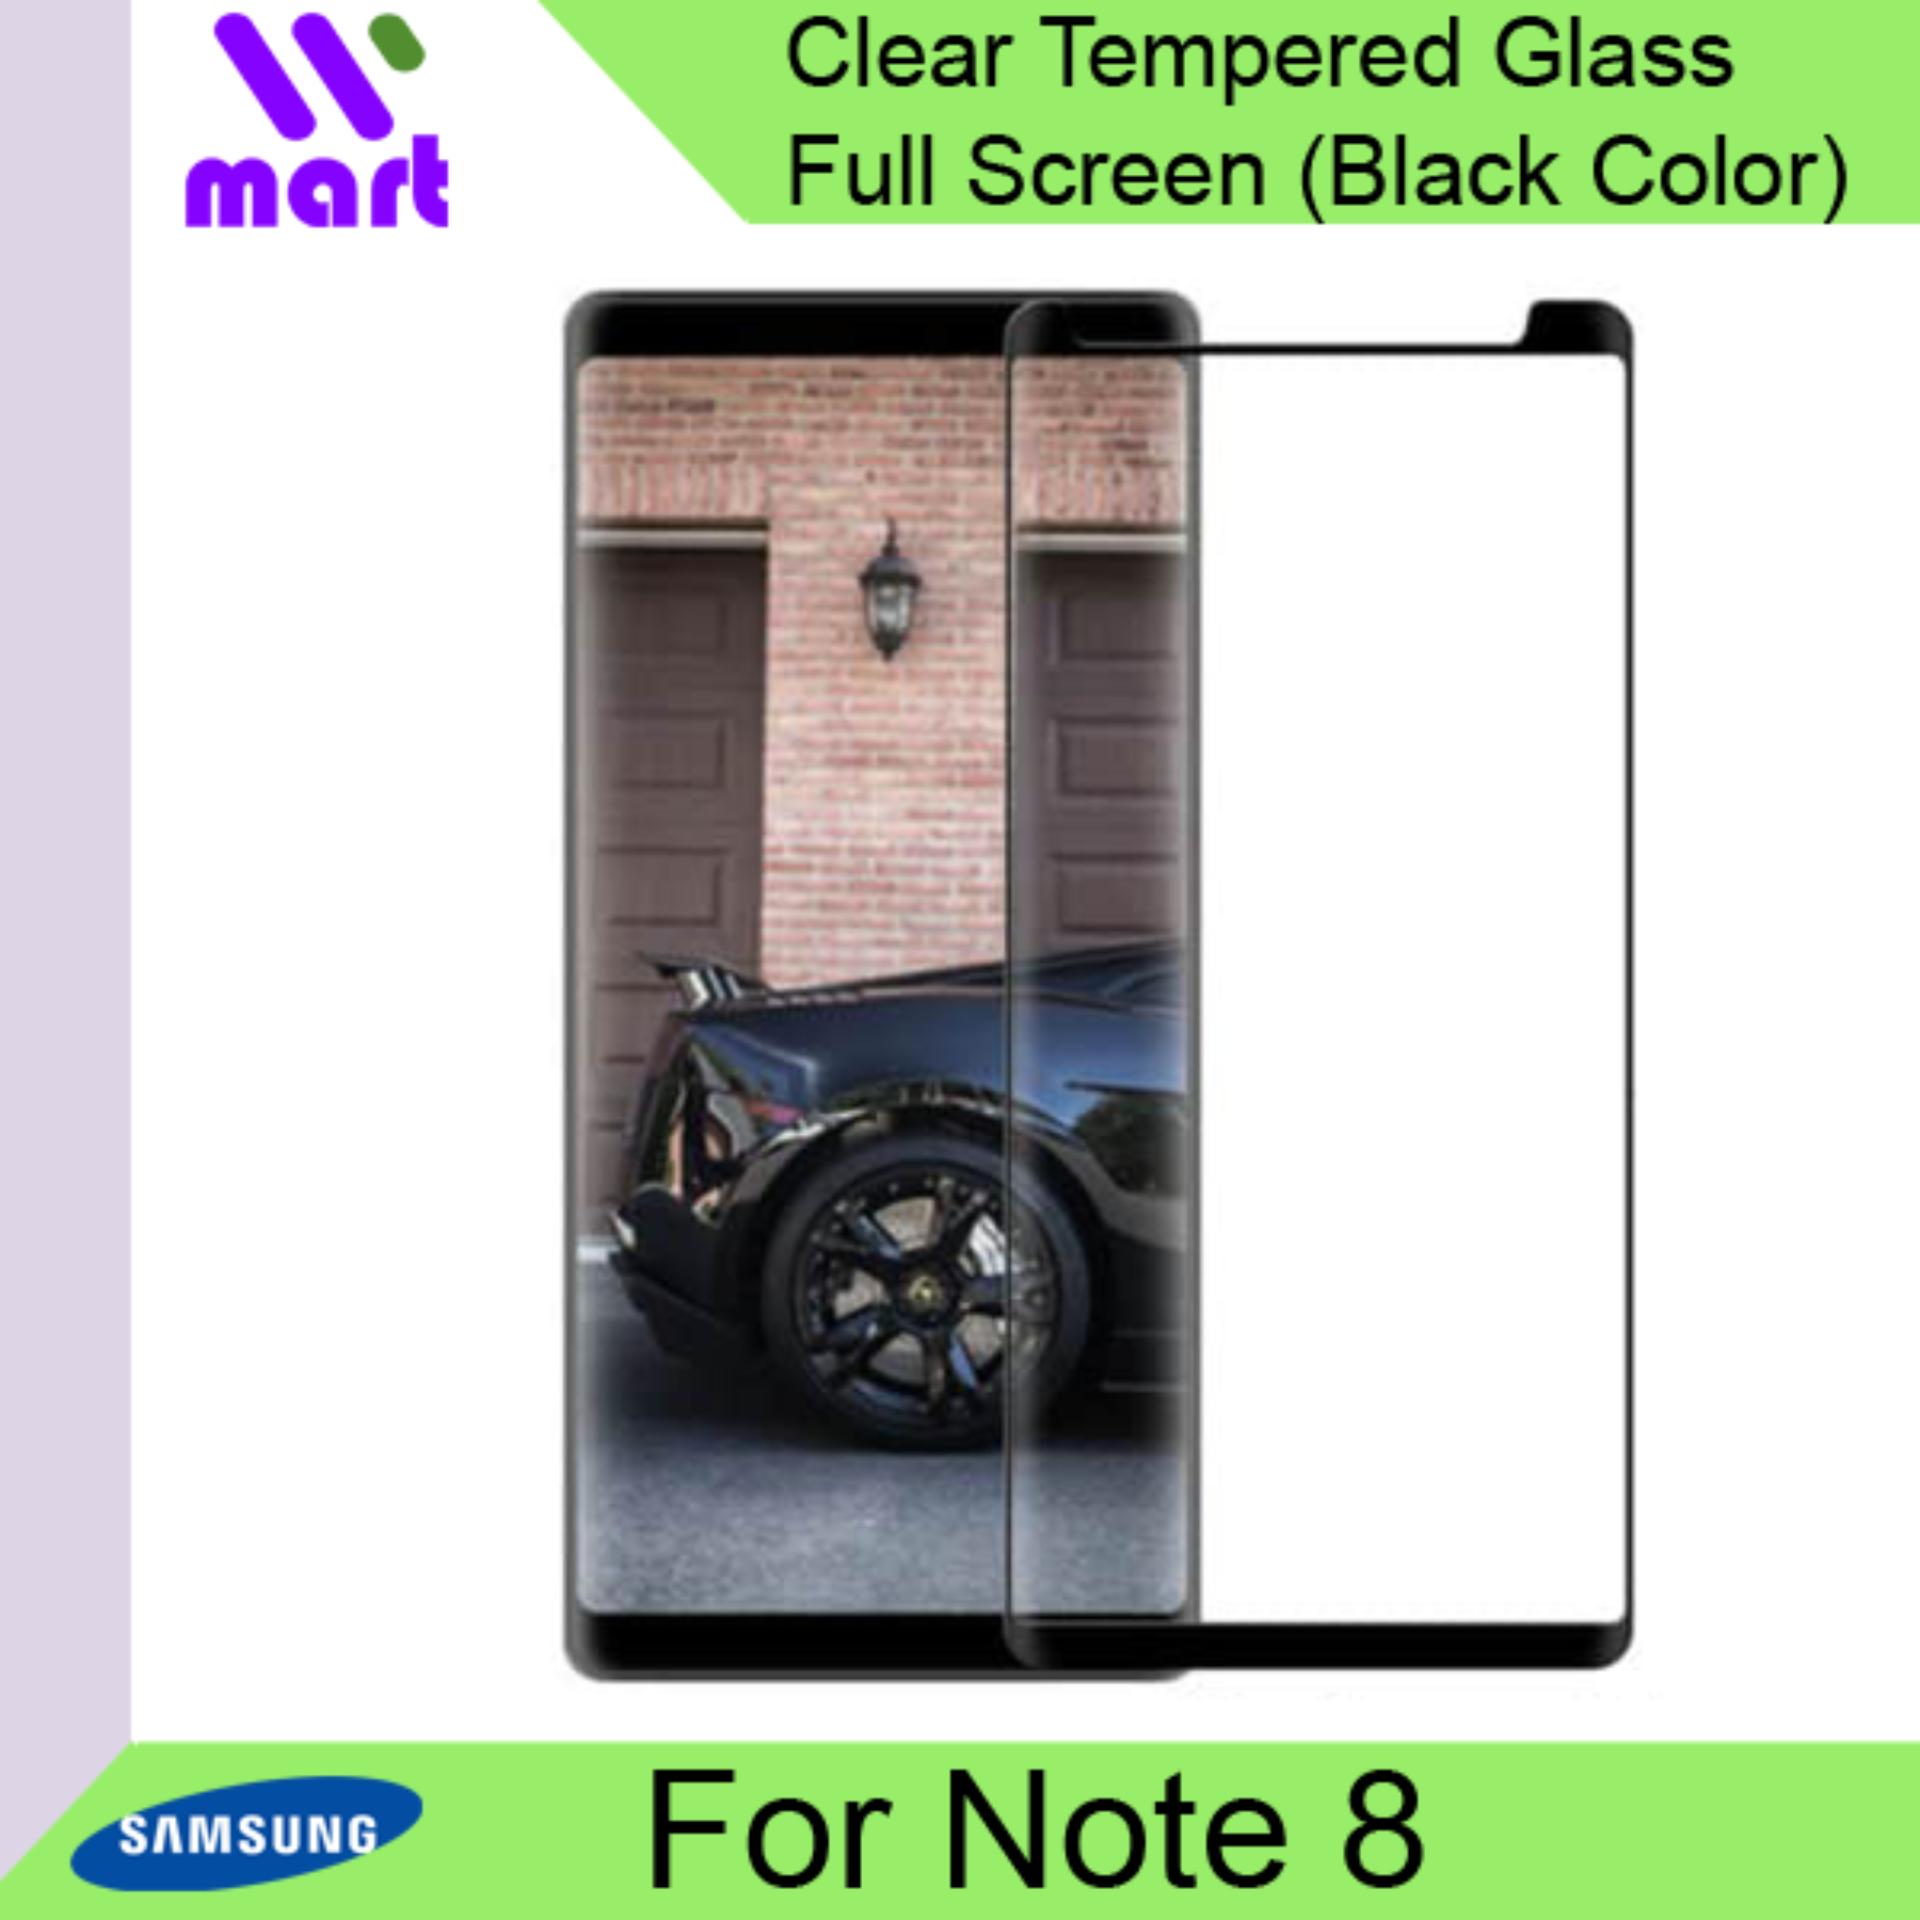 Tempered Glass Full Screen Protector (Black) For Samsung Galaxy Note 8